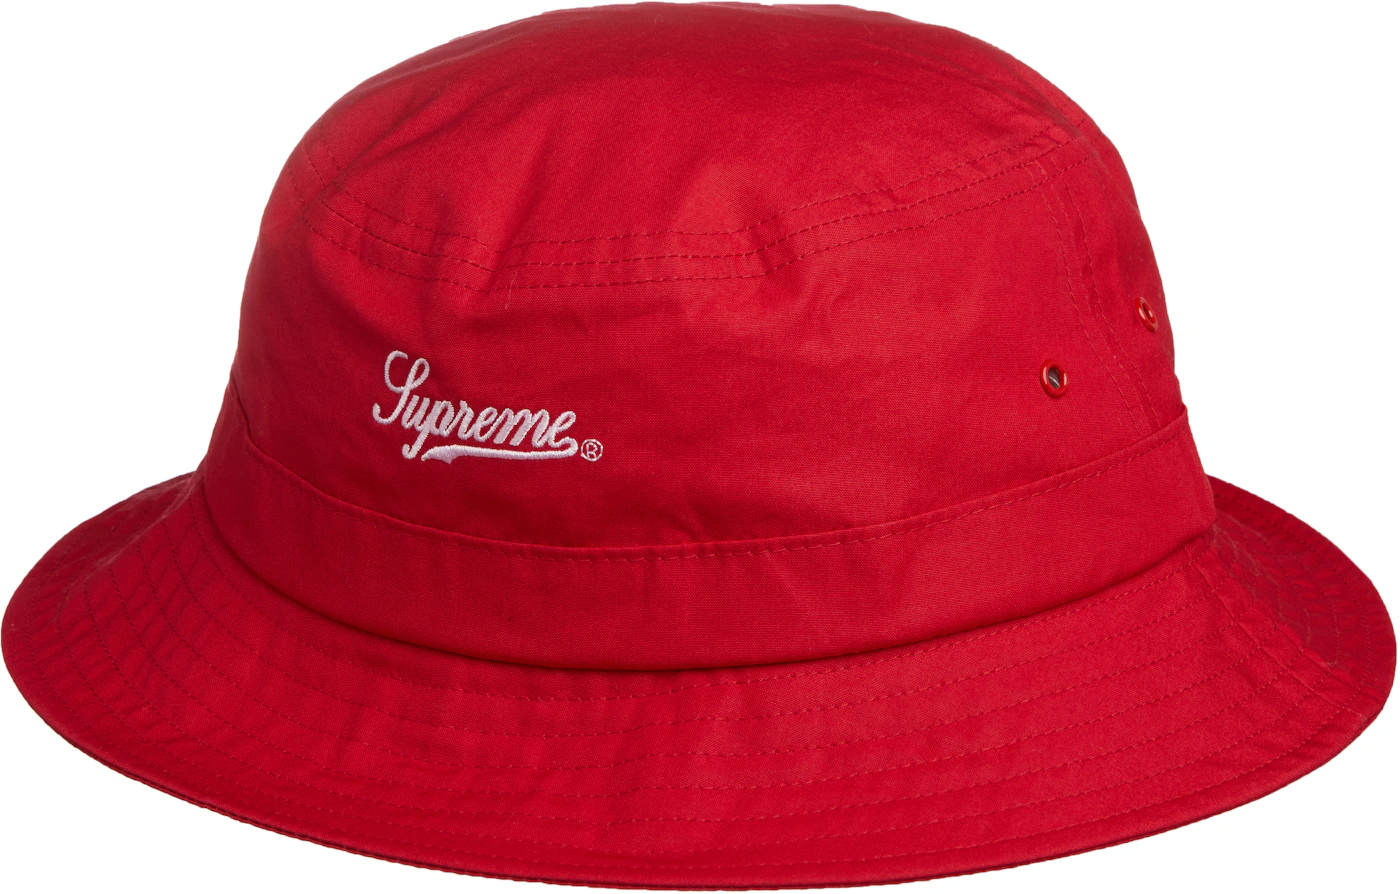 Supreme Bolt Snap Crusher Red - FW21 - US